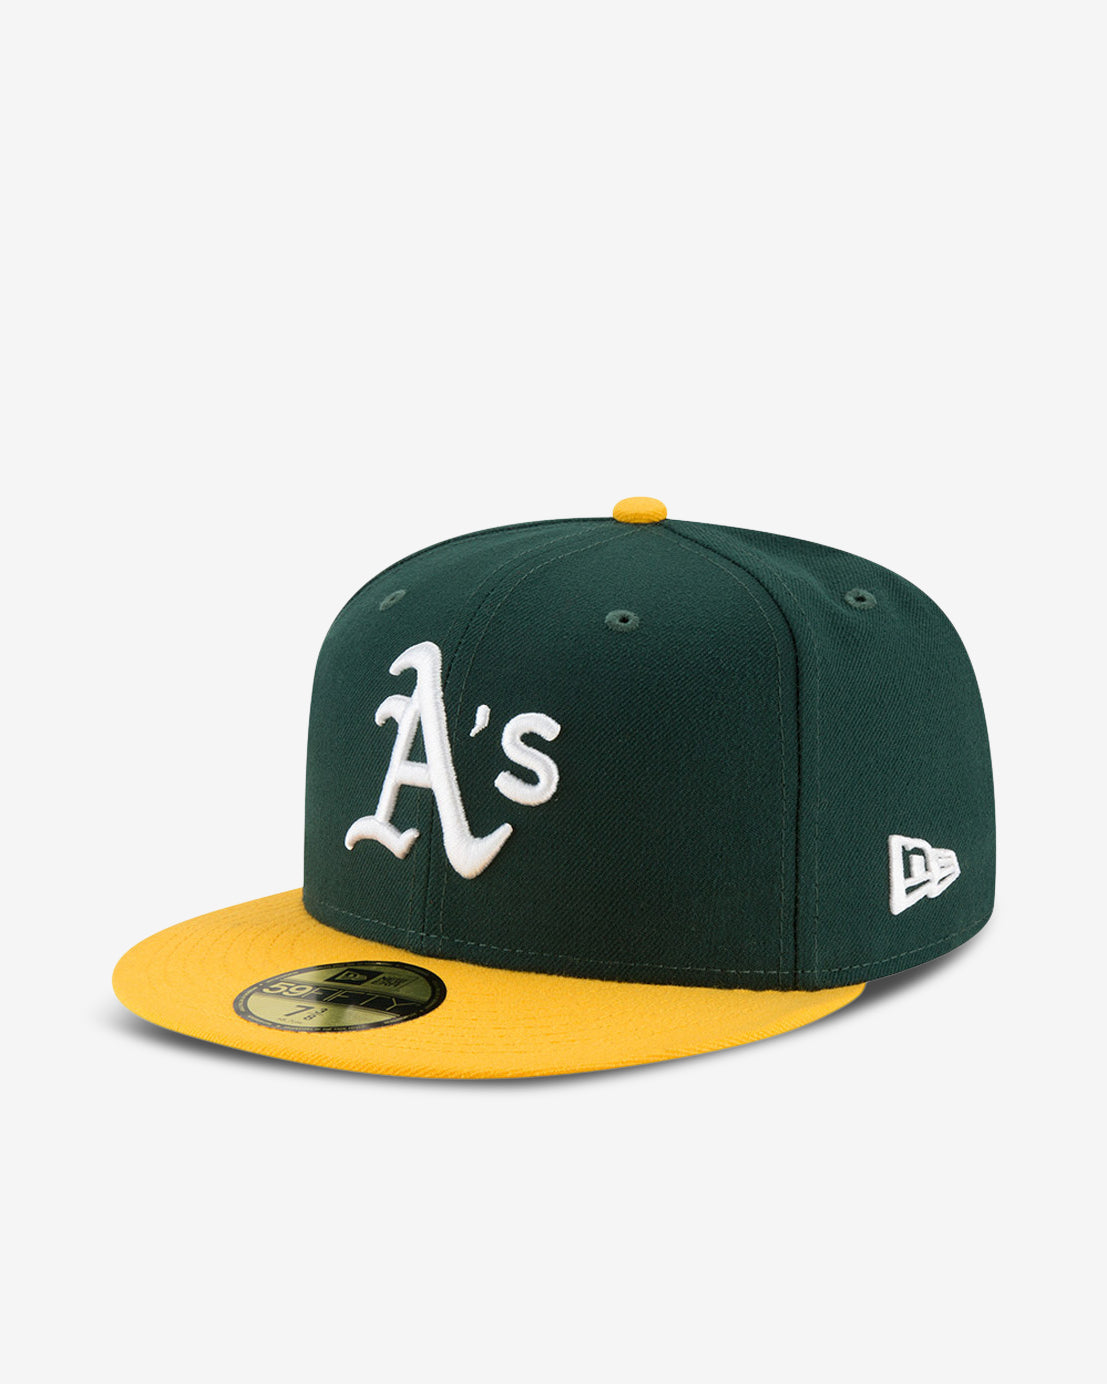 OAKLAND ATHLETICS ACPERF 59FIFTY - GREEN/YELLOW